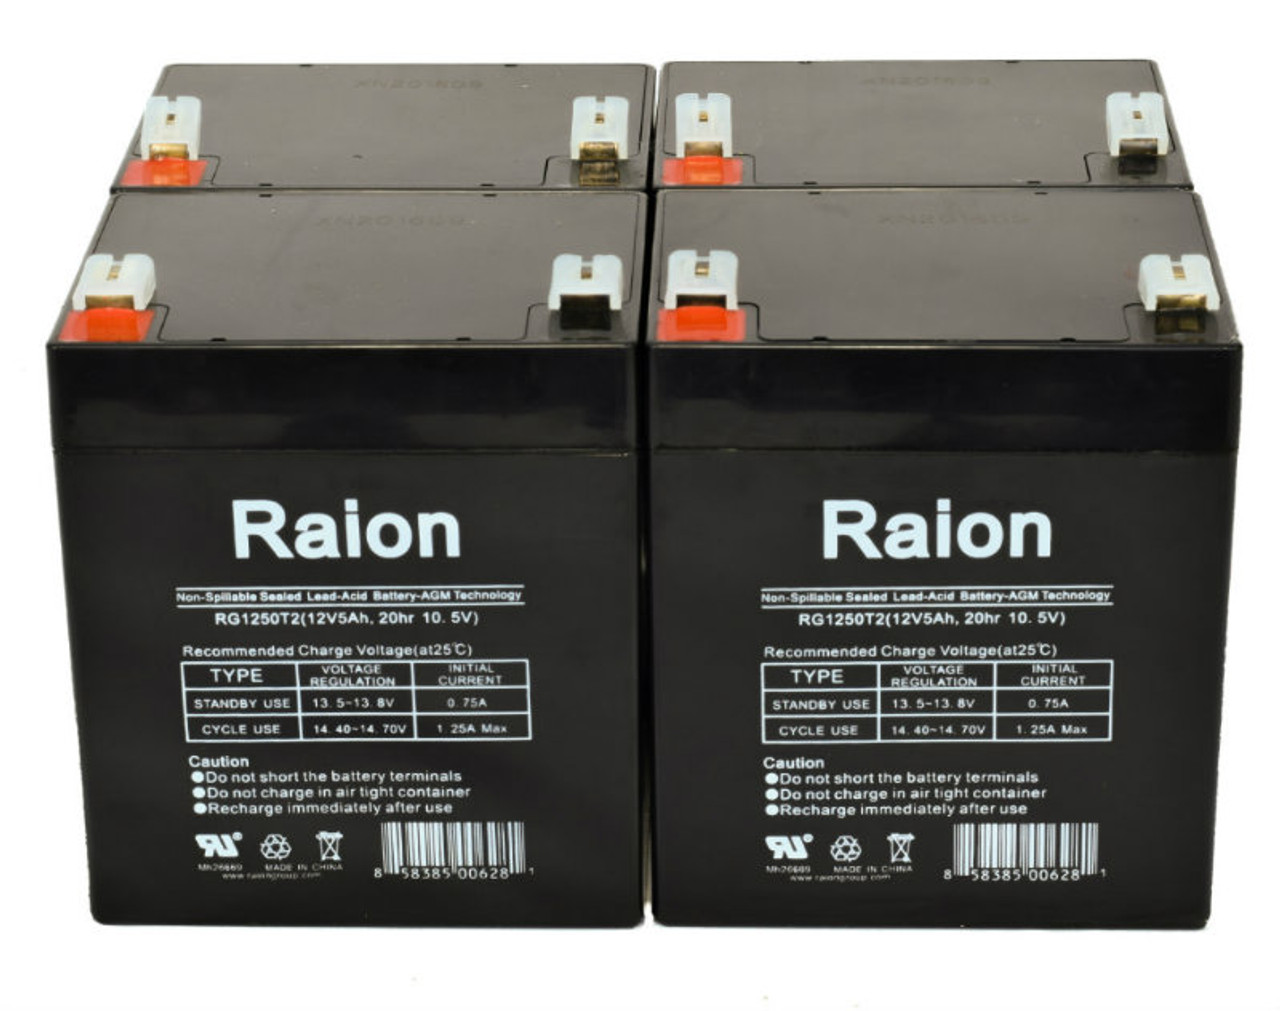 Raion Power 12V 5Ah RG1250T2 Replacement Lead Acid Battery for Valen Topin 12 TP 5 - 4 Pack